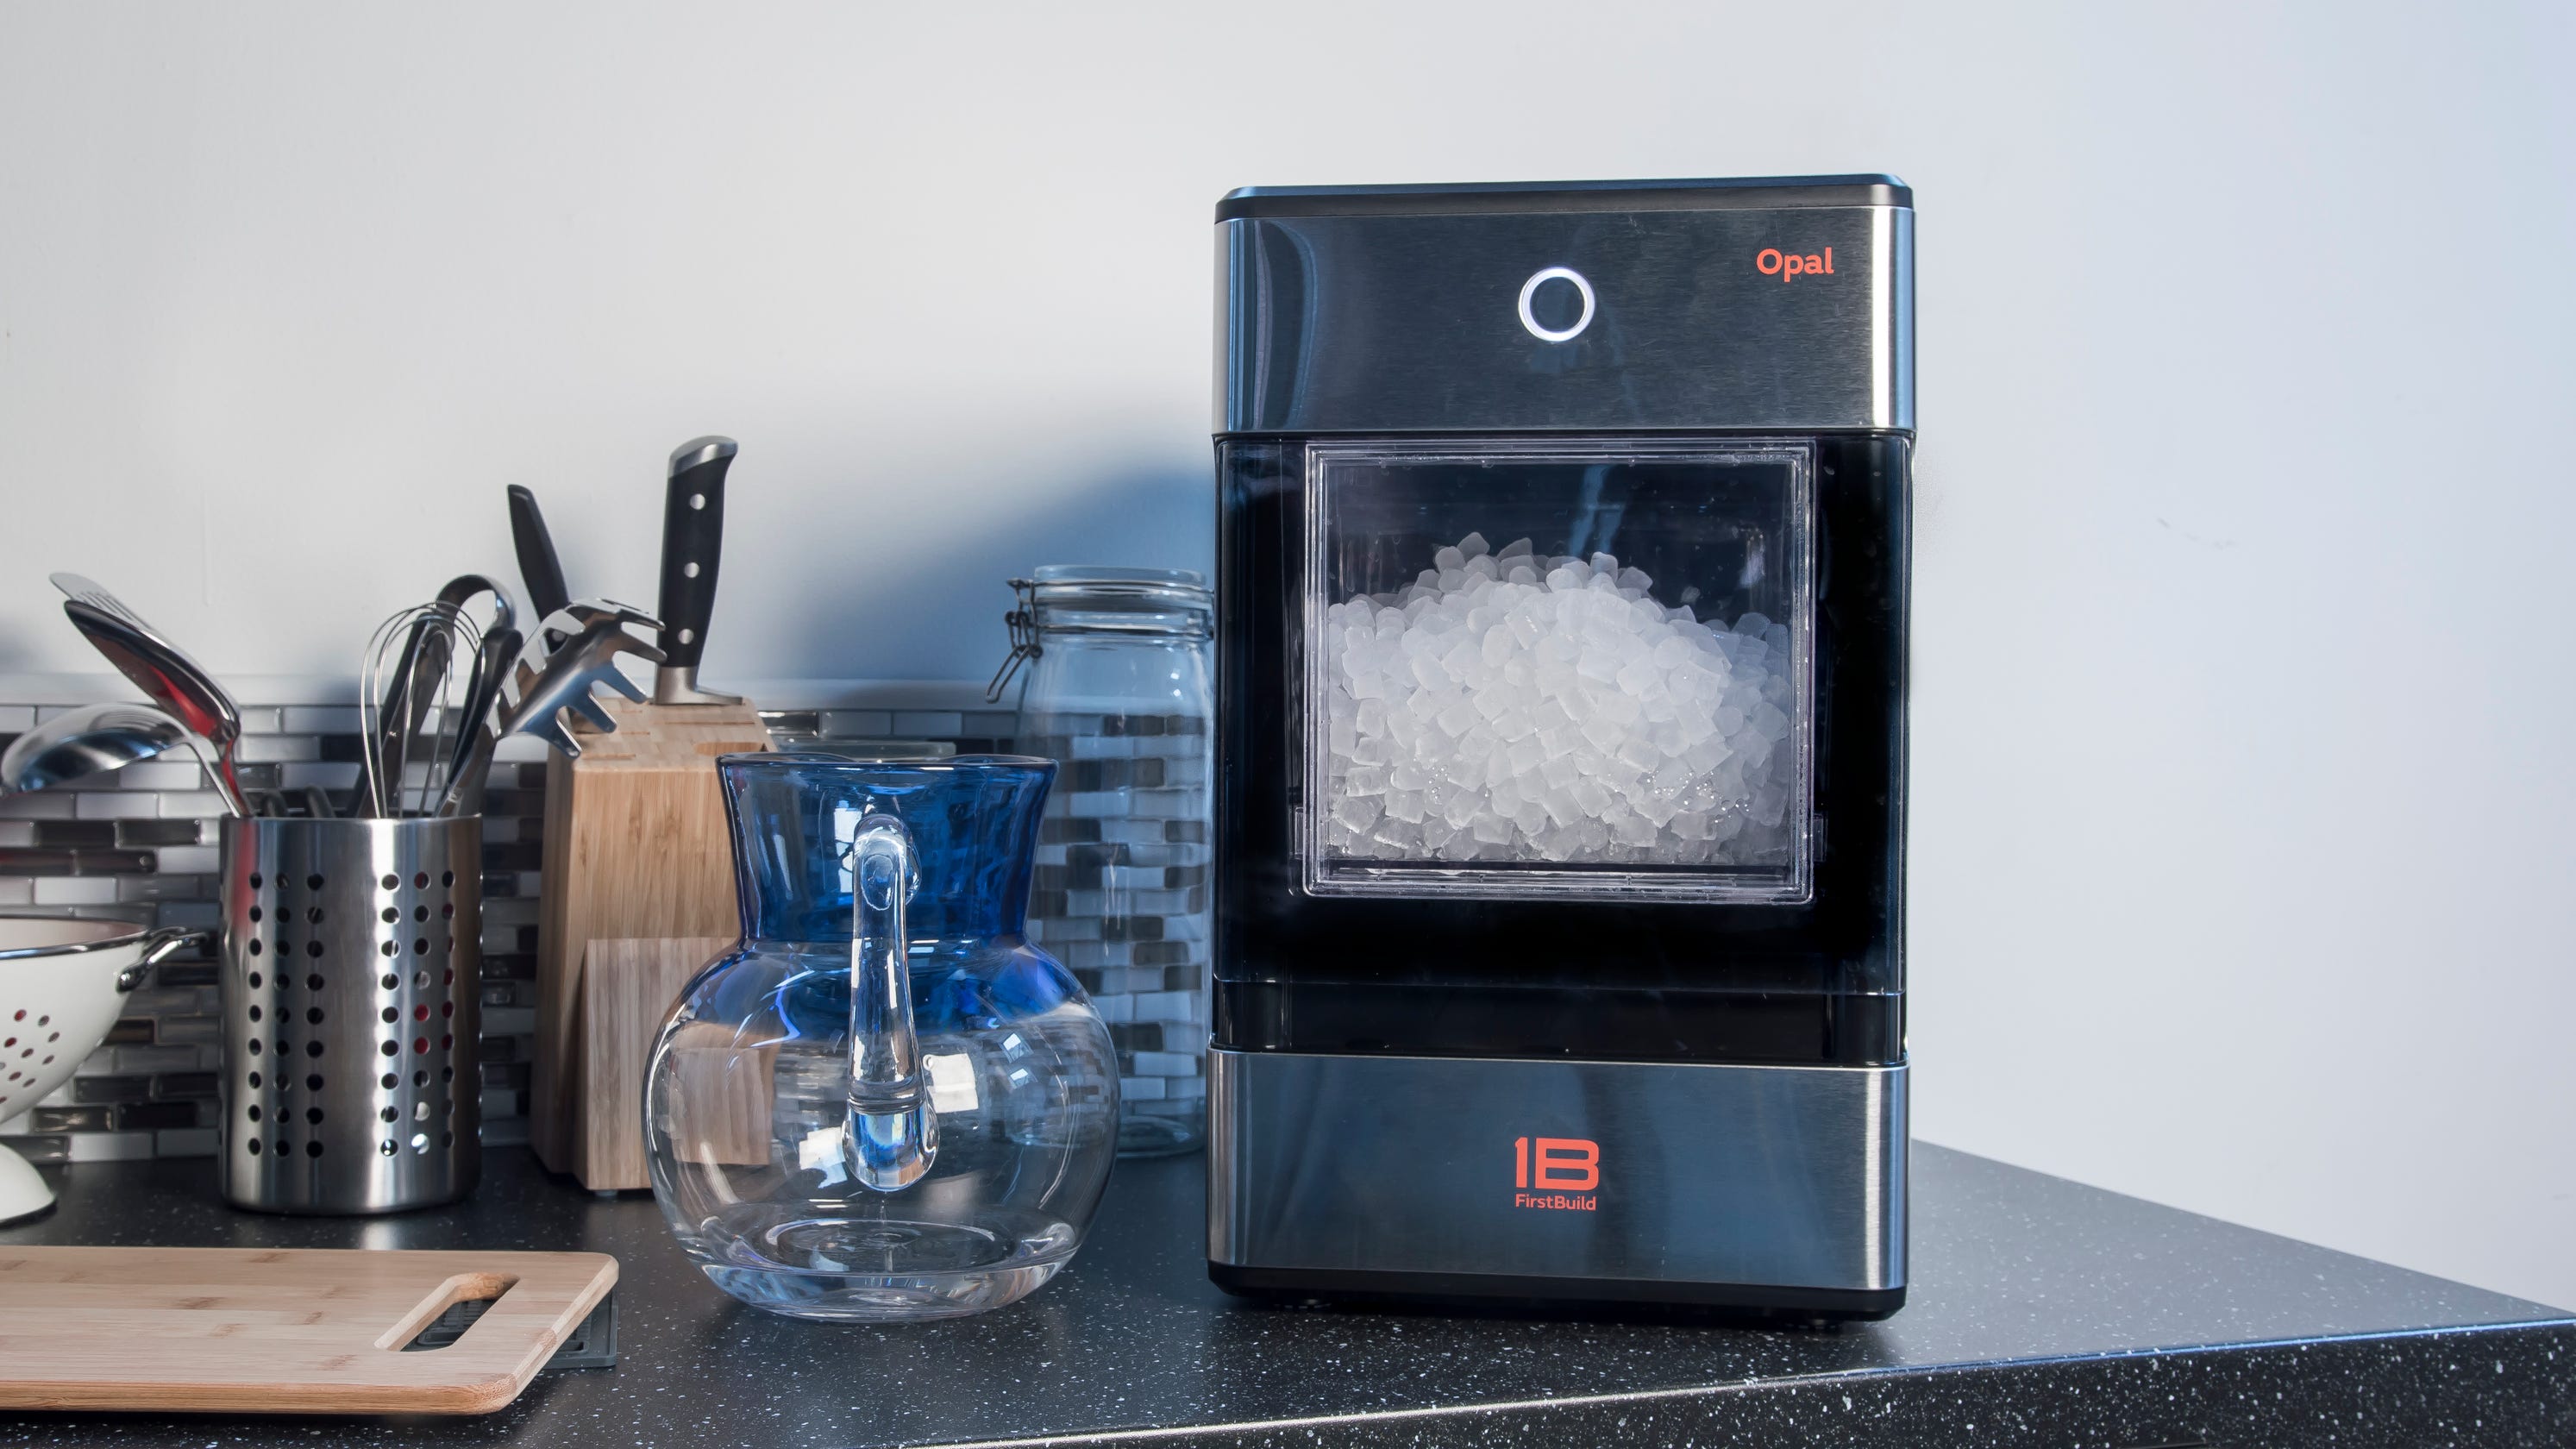 Amazon Prime Day 2019 The Nugget Ice Maker Is At Its Lowest Price